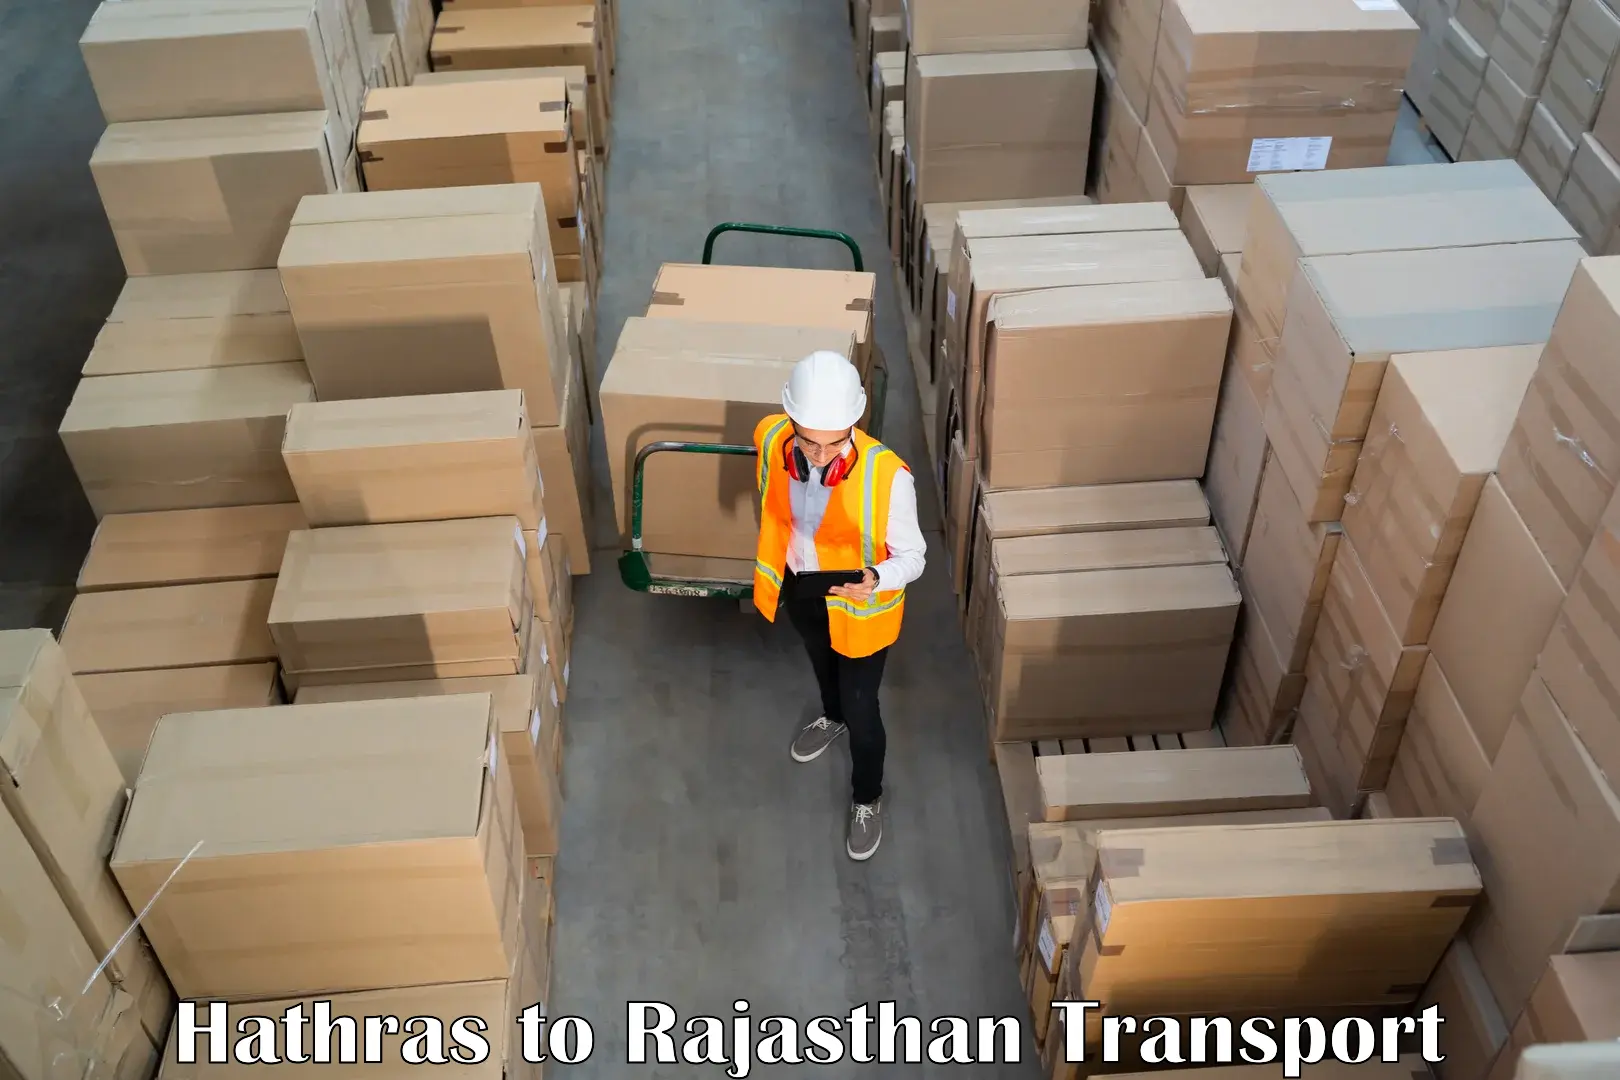 Daily transport service Hathras to Rajasthan